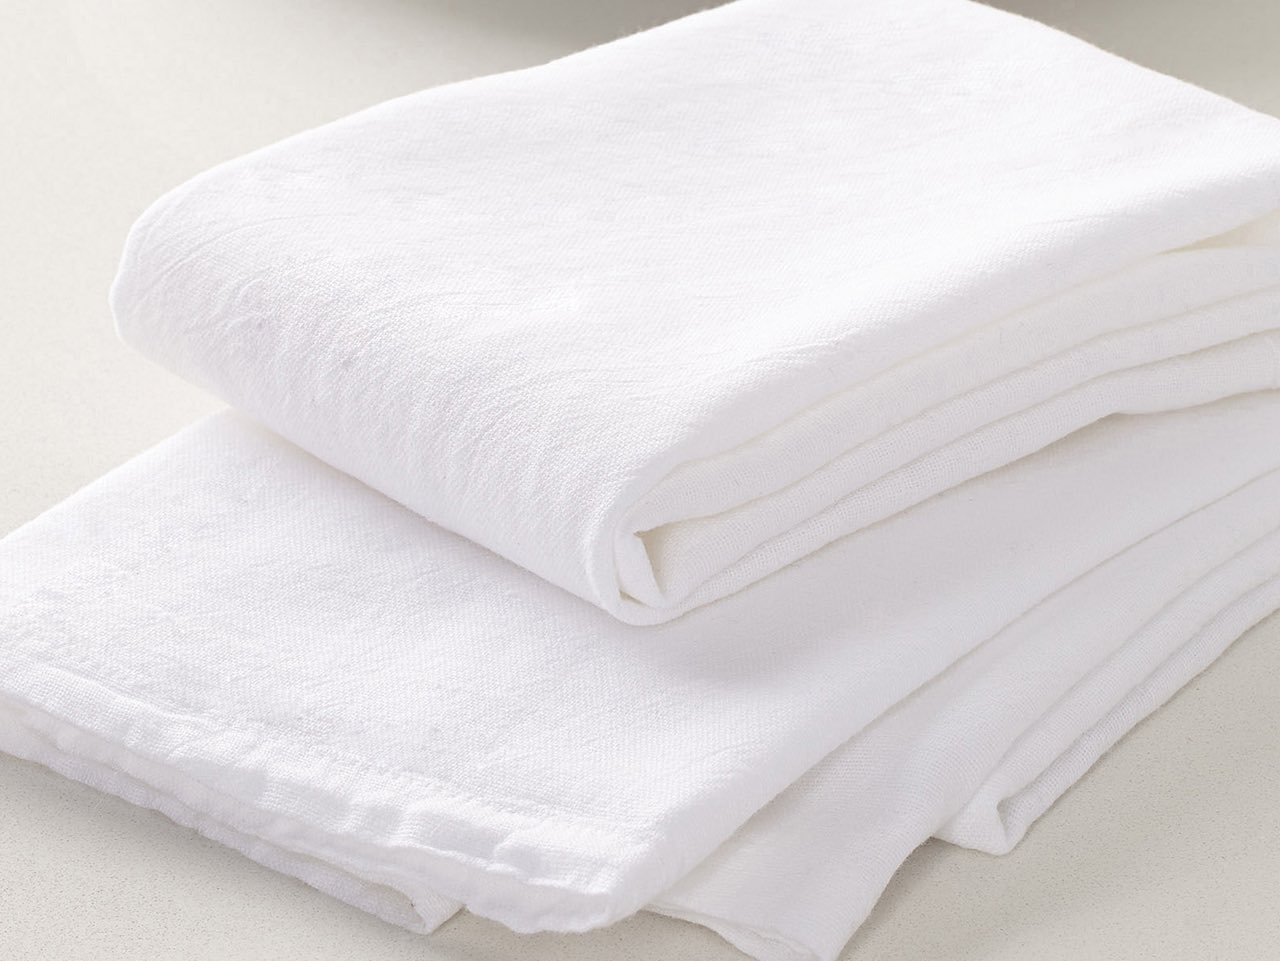 These Are The Best Kitchen Towels For Less Than $2